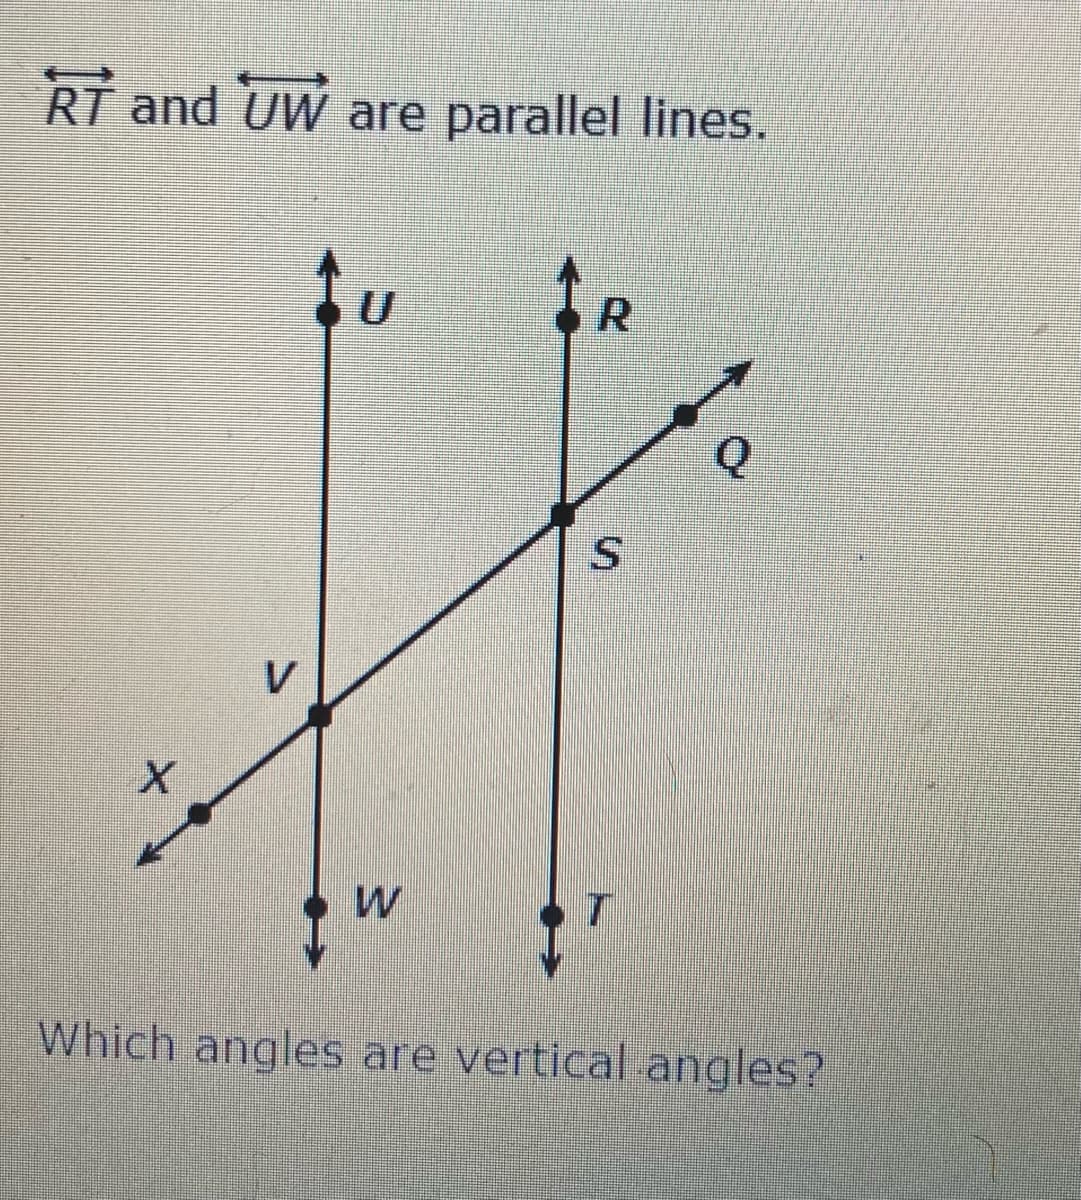 RT and UW are parallel lines.
R.
S.
V
Which angles are vertical.angles?
